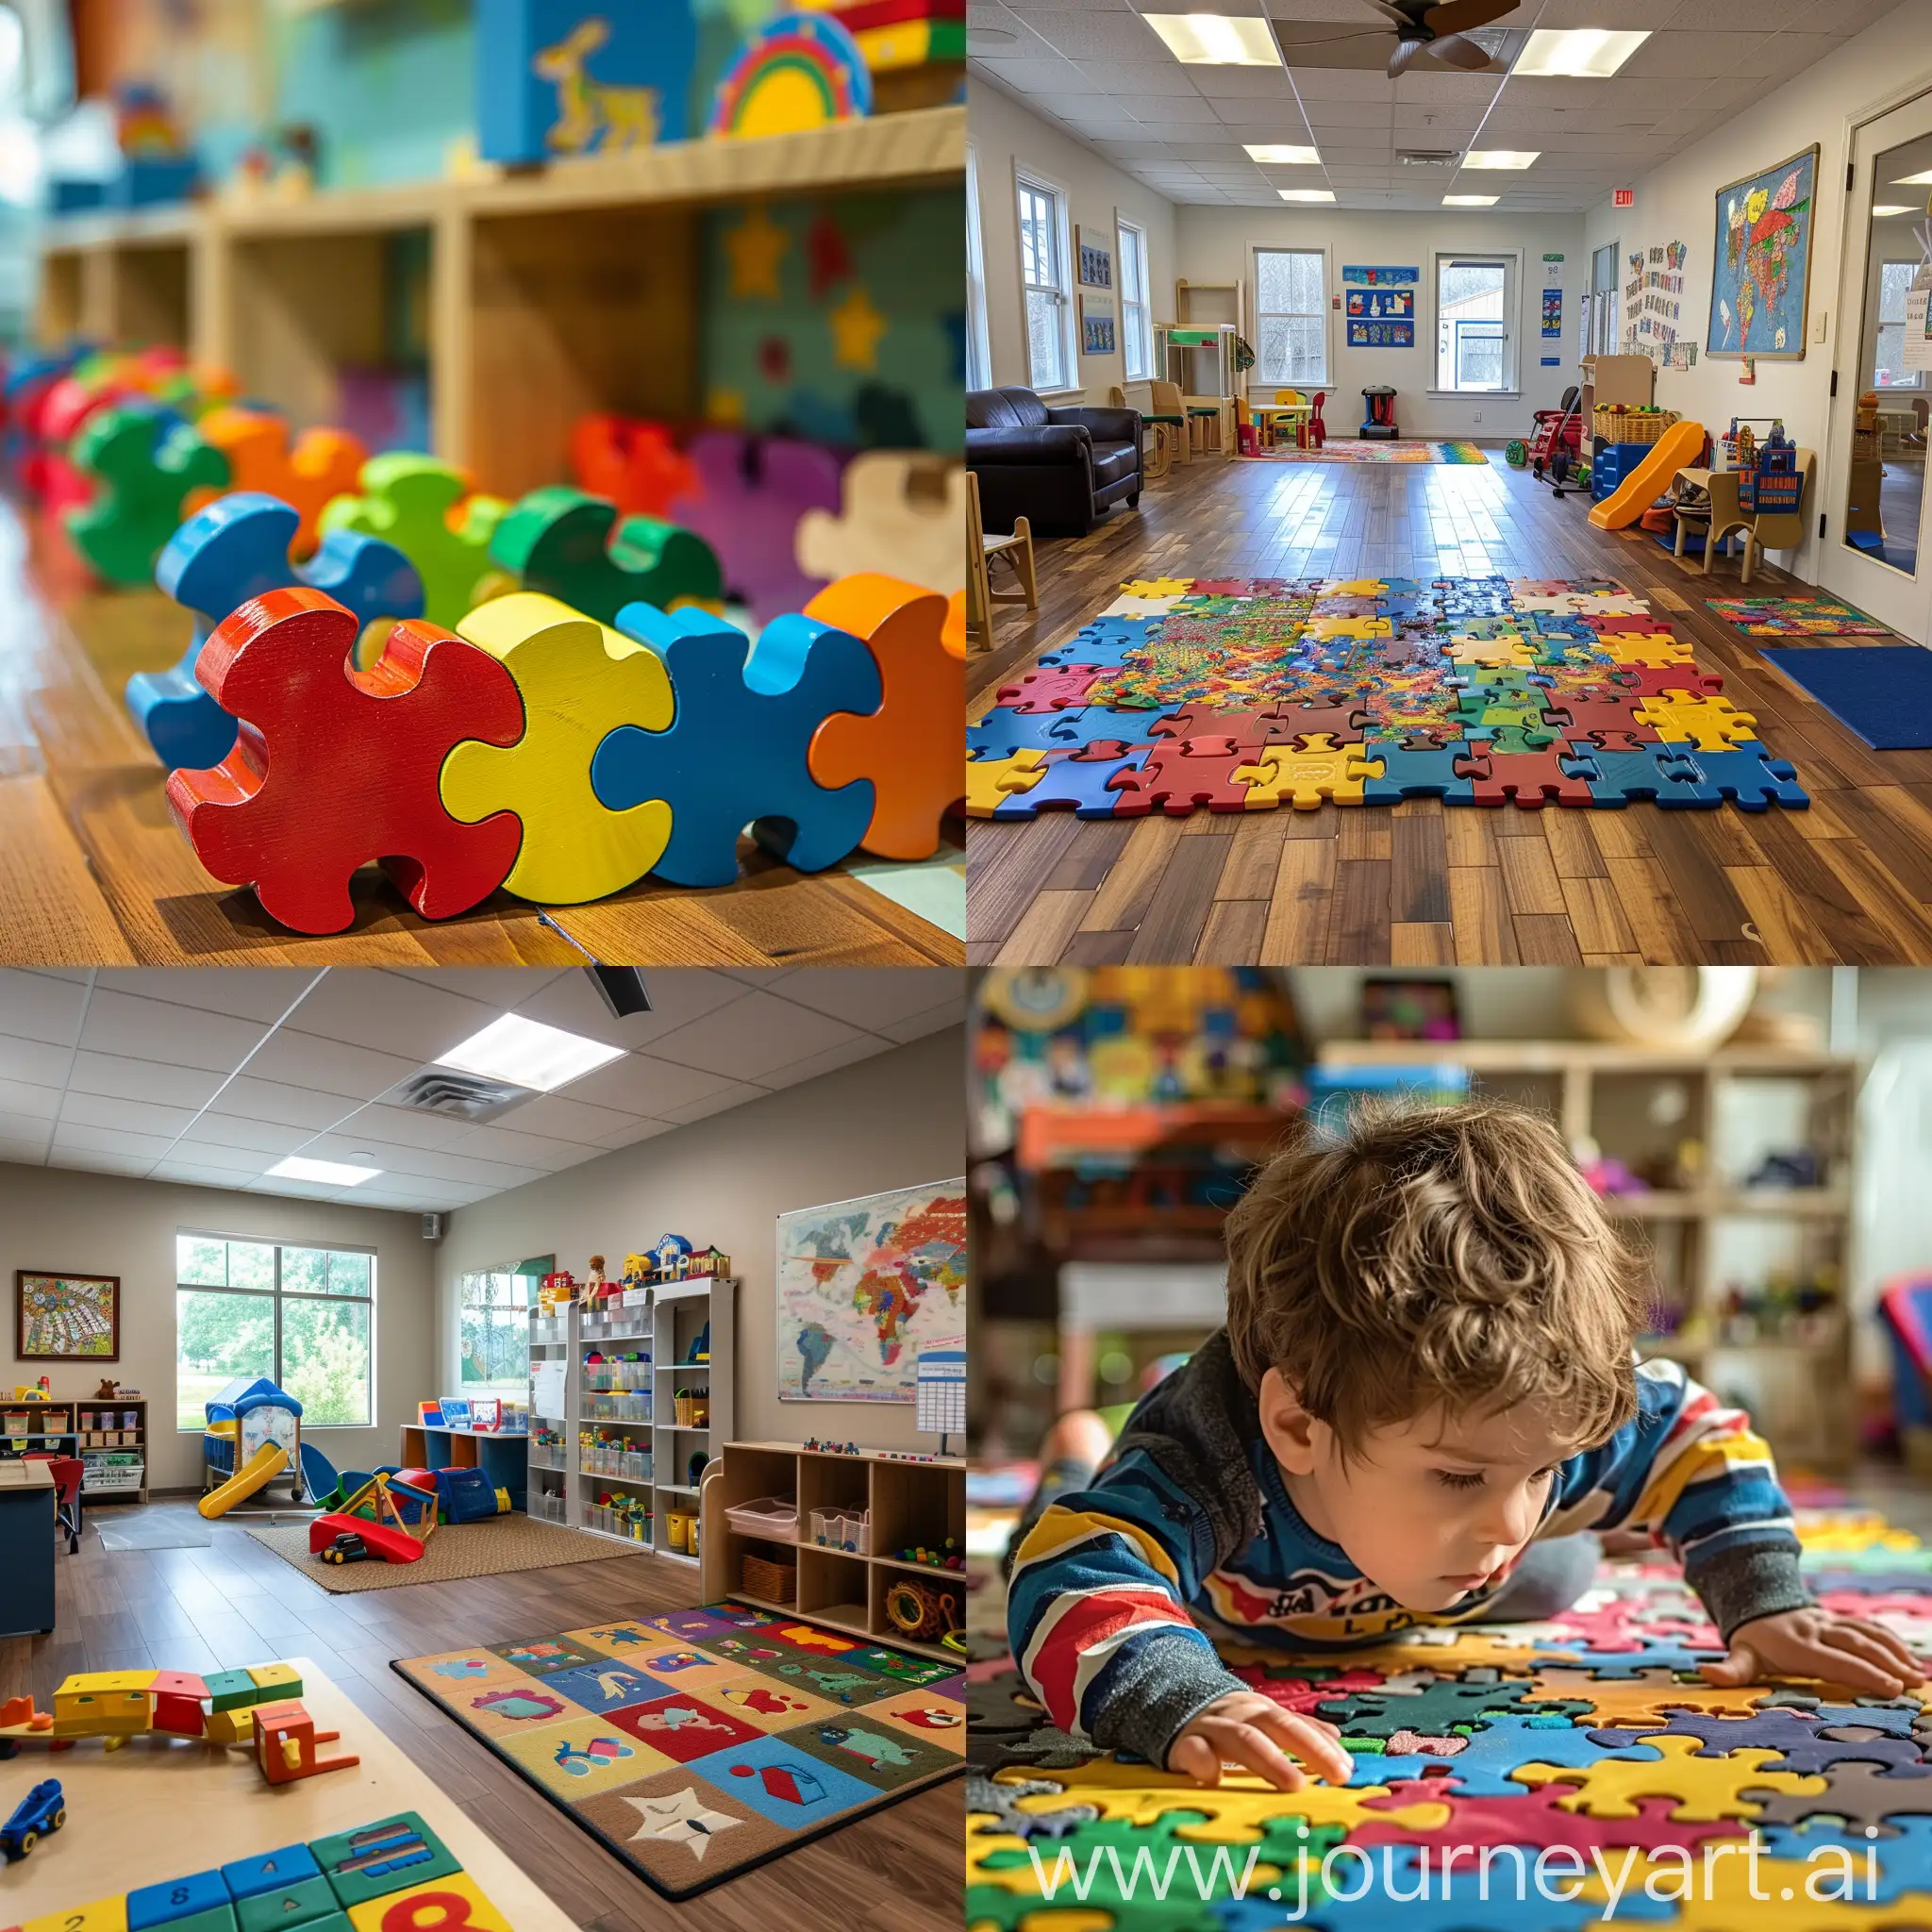 Autism-Child-Center-with-Vibrant-Colors-and-Diverse-Activities